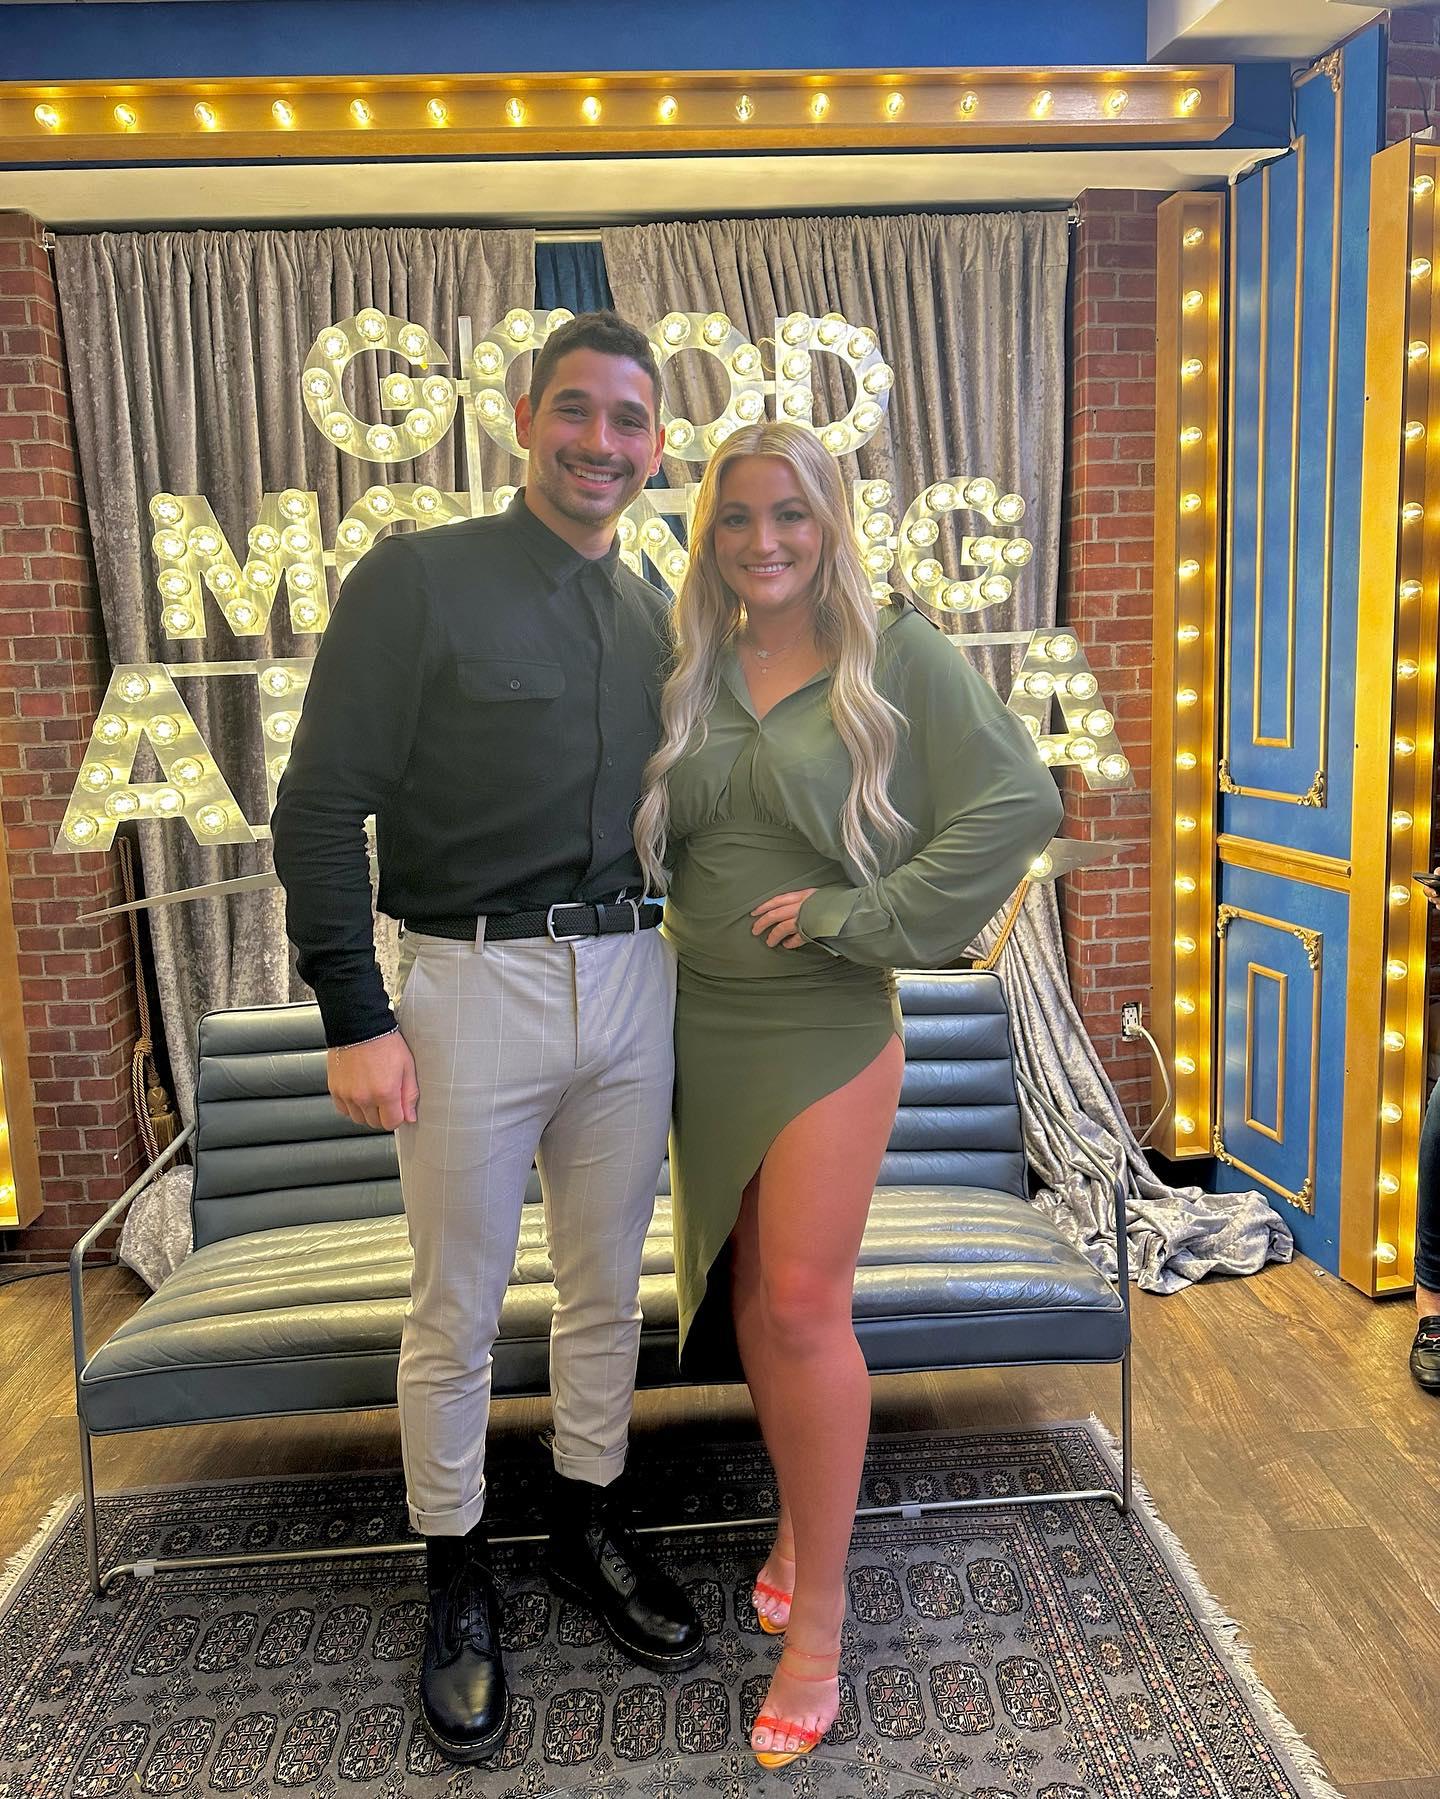 Jamie Lynn Spears on Dancing with the stars